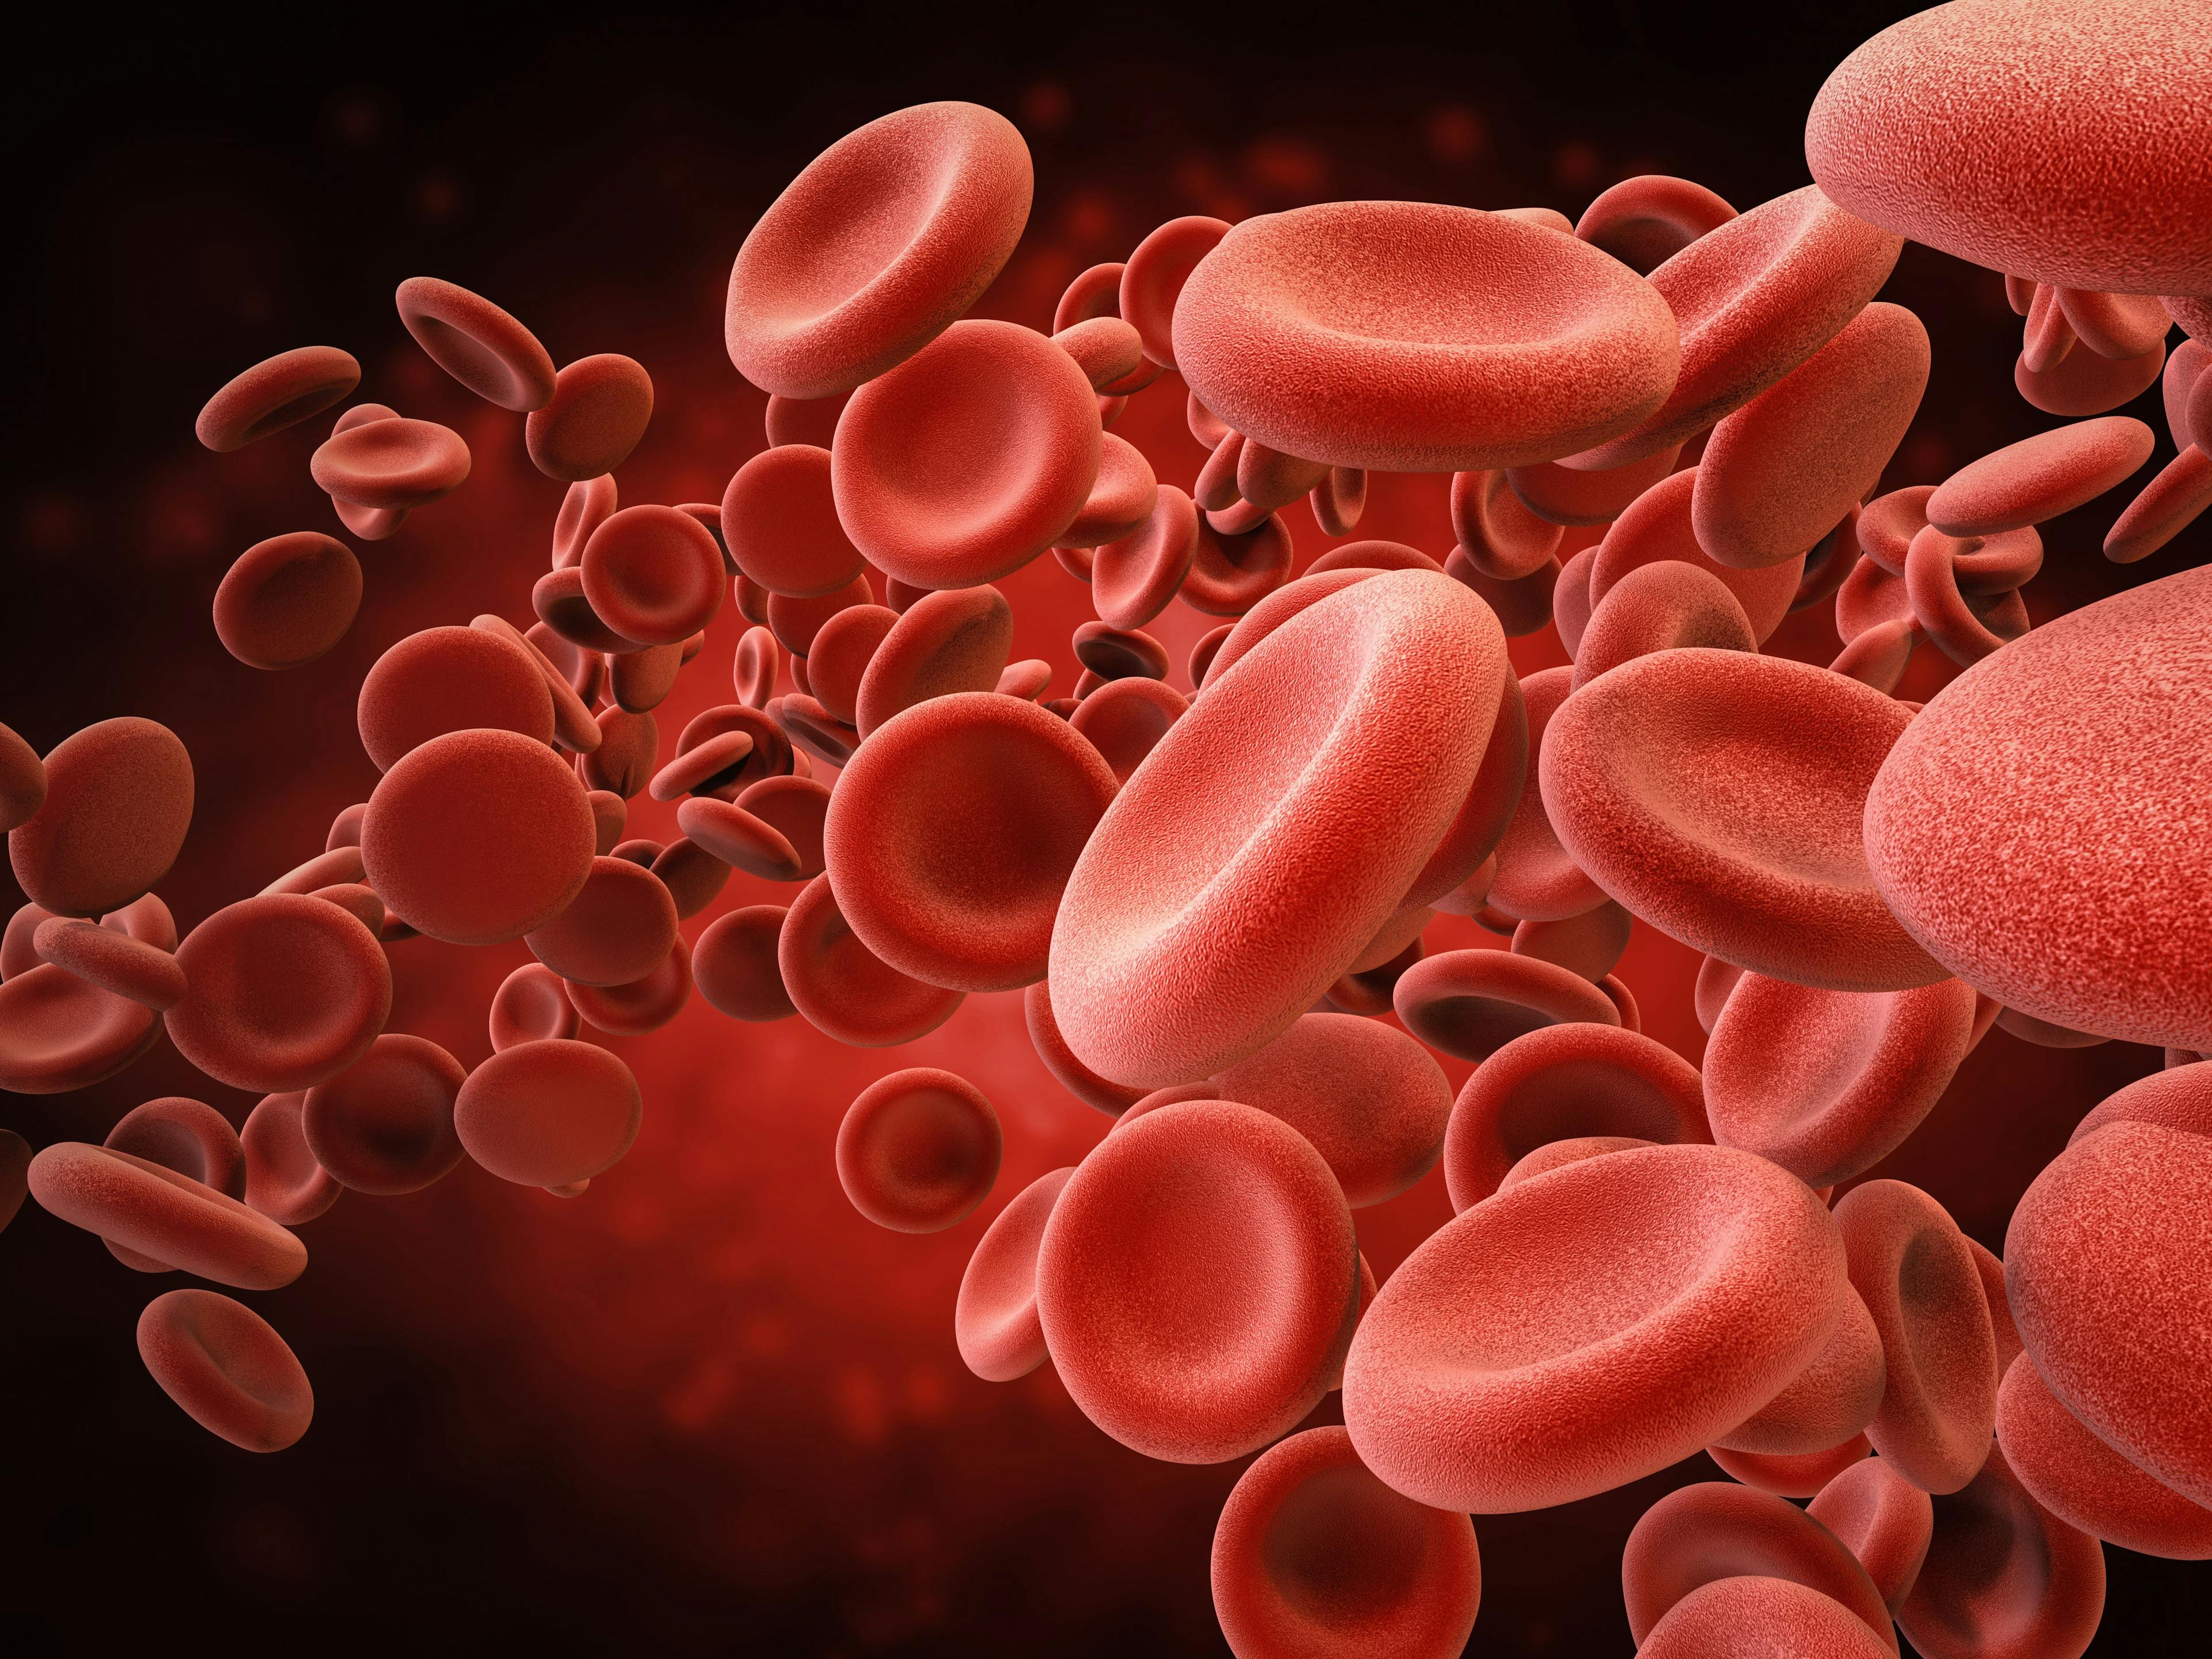 Abelacimab Demonstrates Potential of Factor XI Inhibition in Preventing Blood Clots